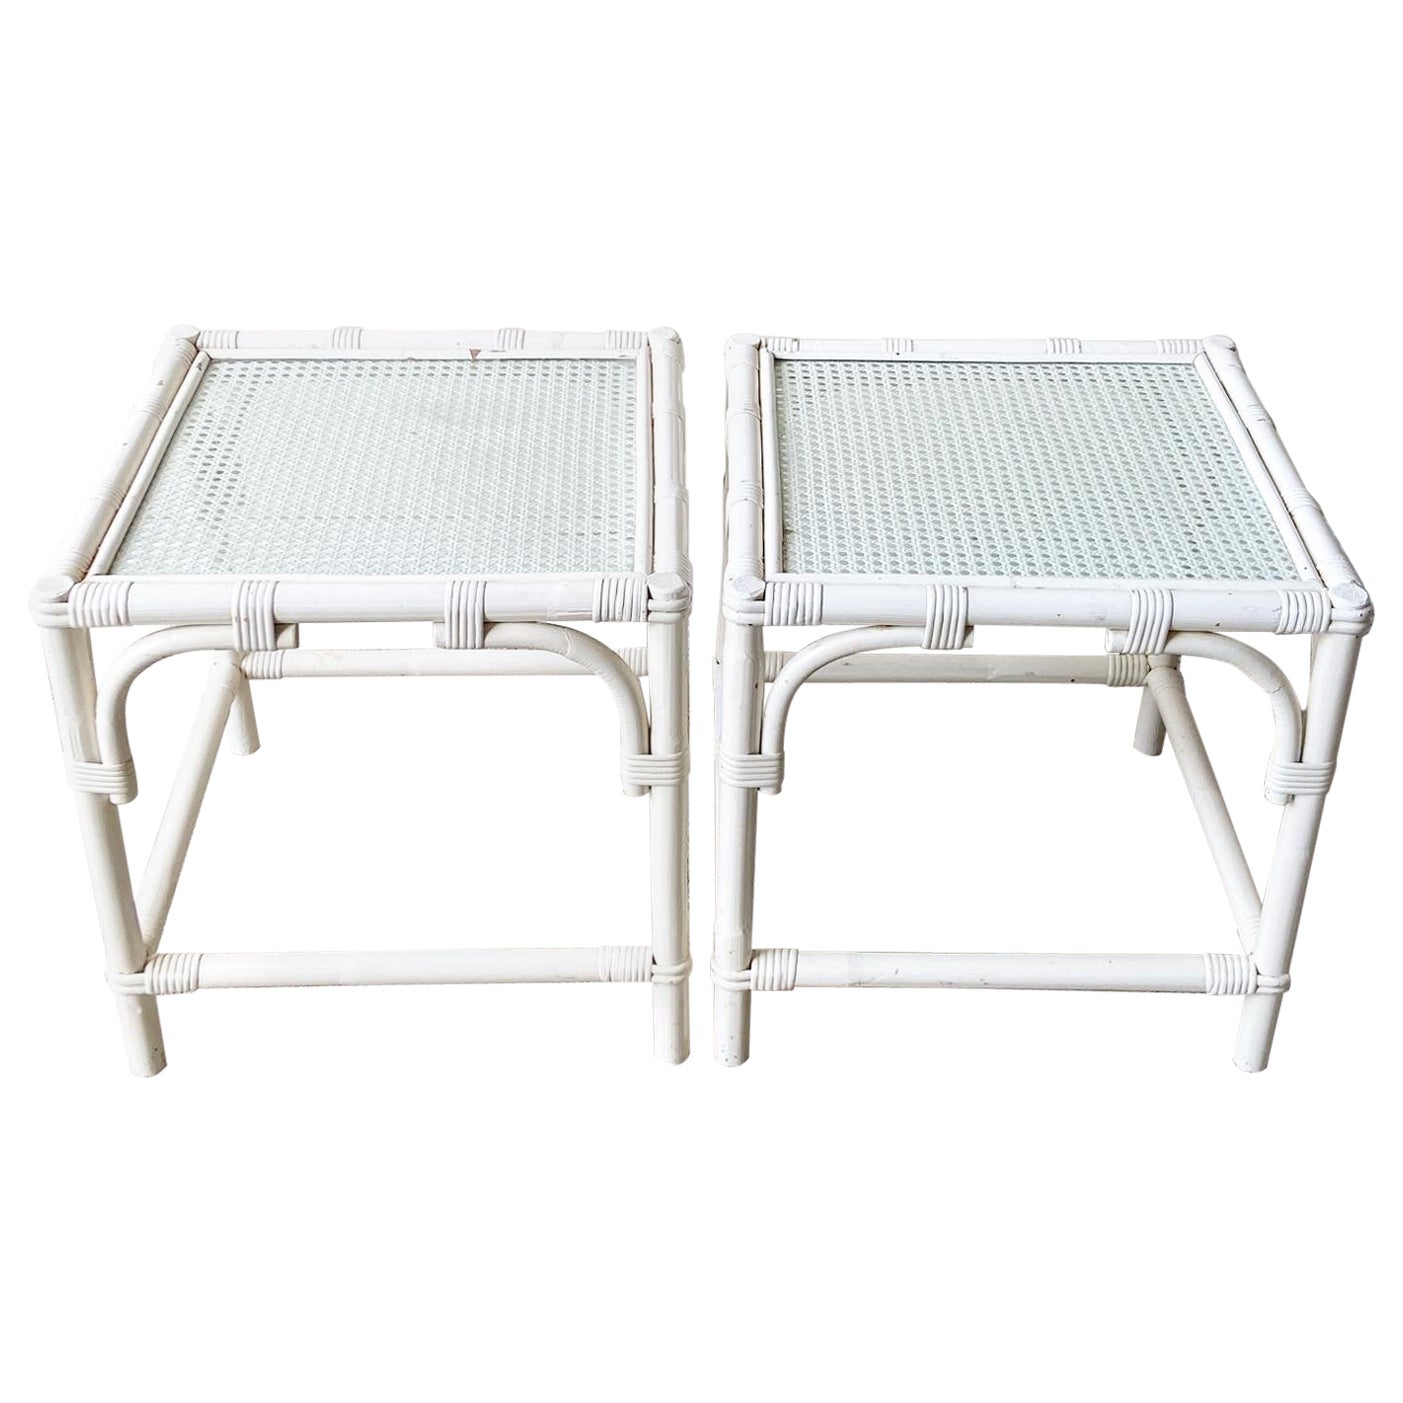 Pair of Boho Chic White Bamboo Rattan Side Tables with Cane and Glass Top